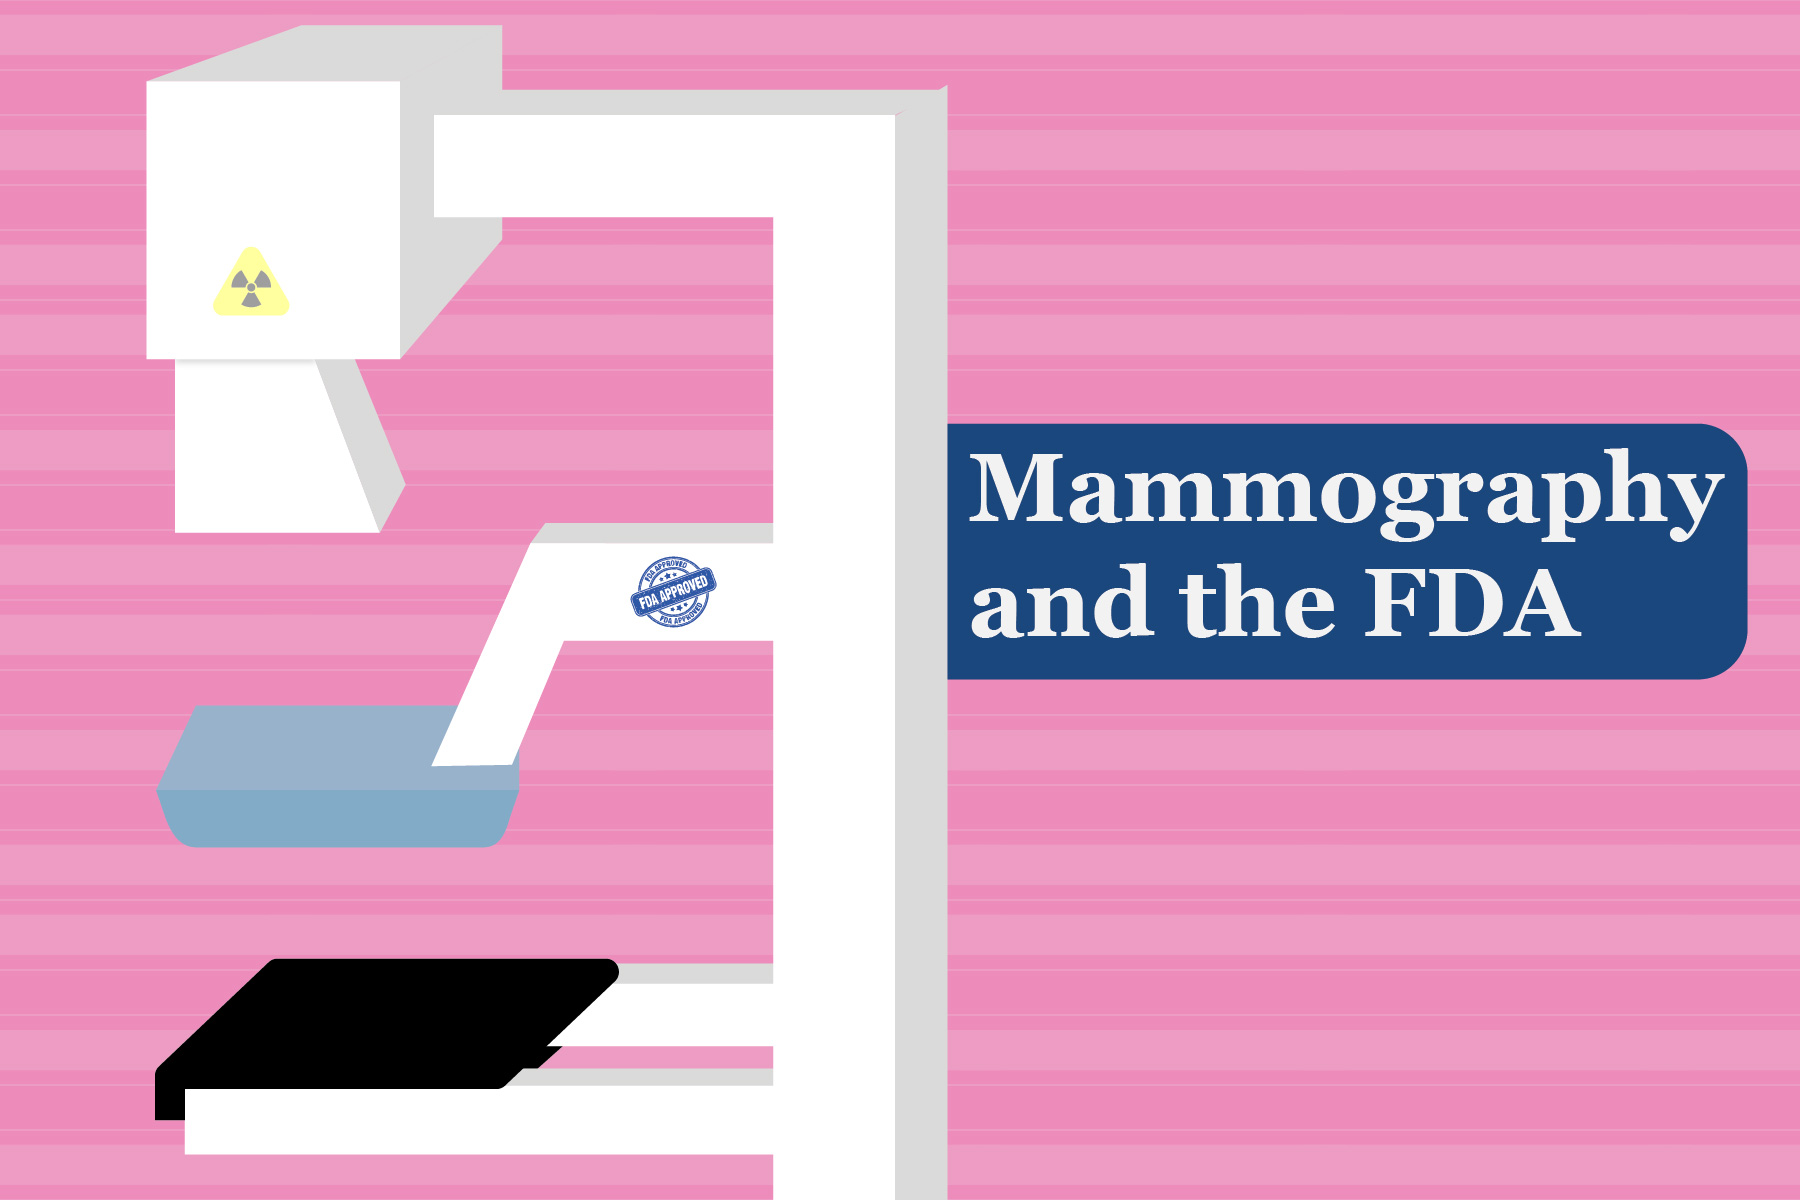 Mammography and the FDA